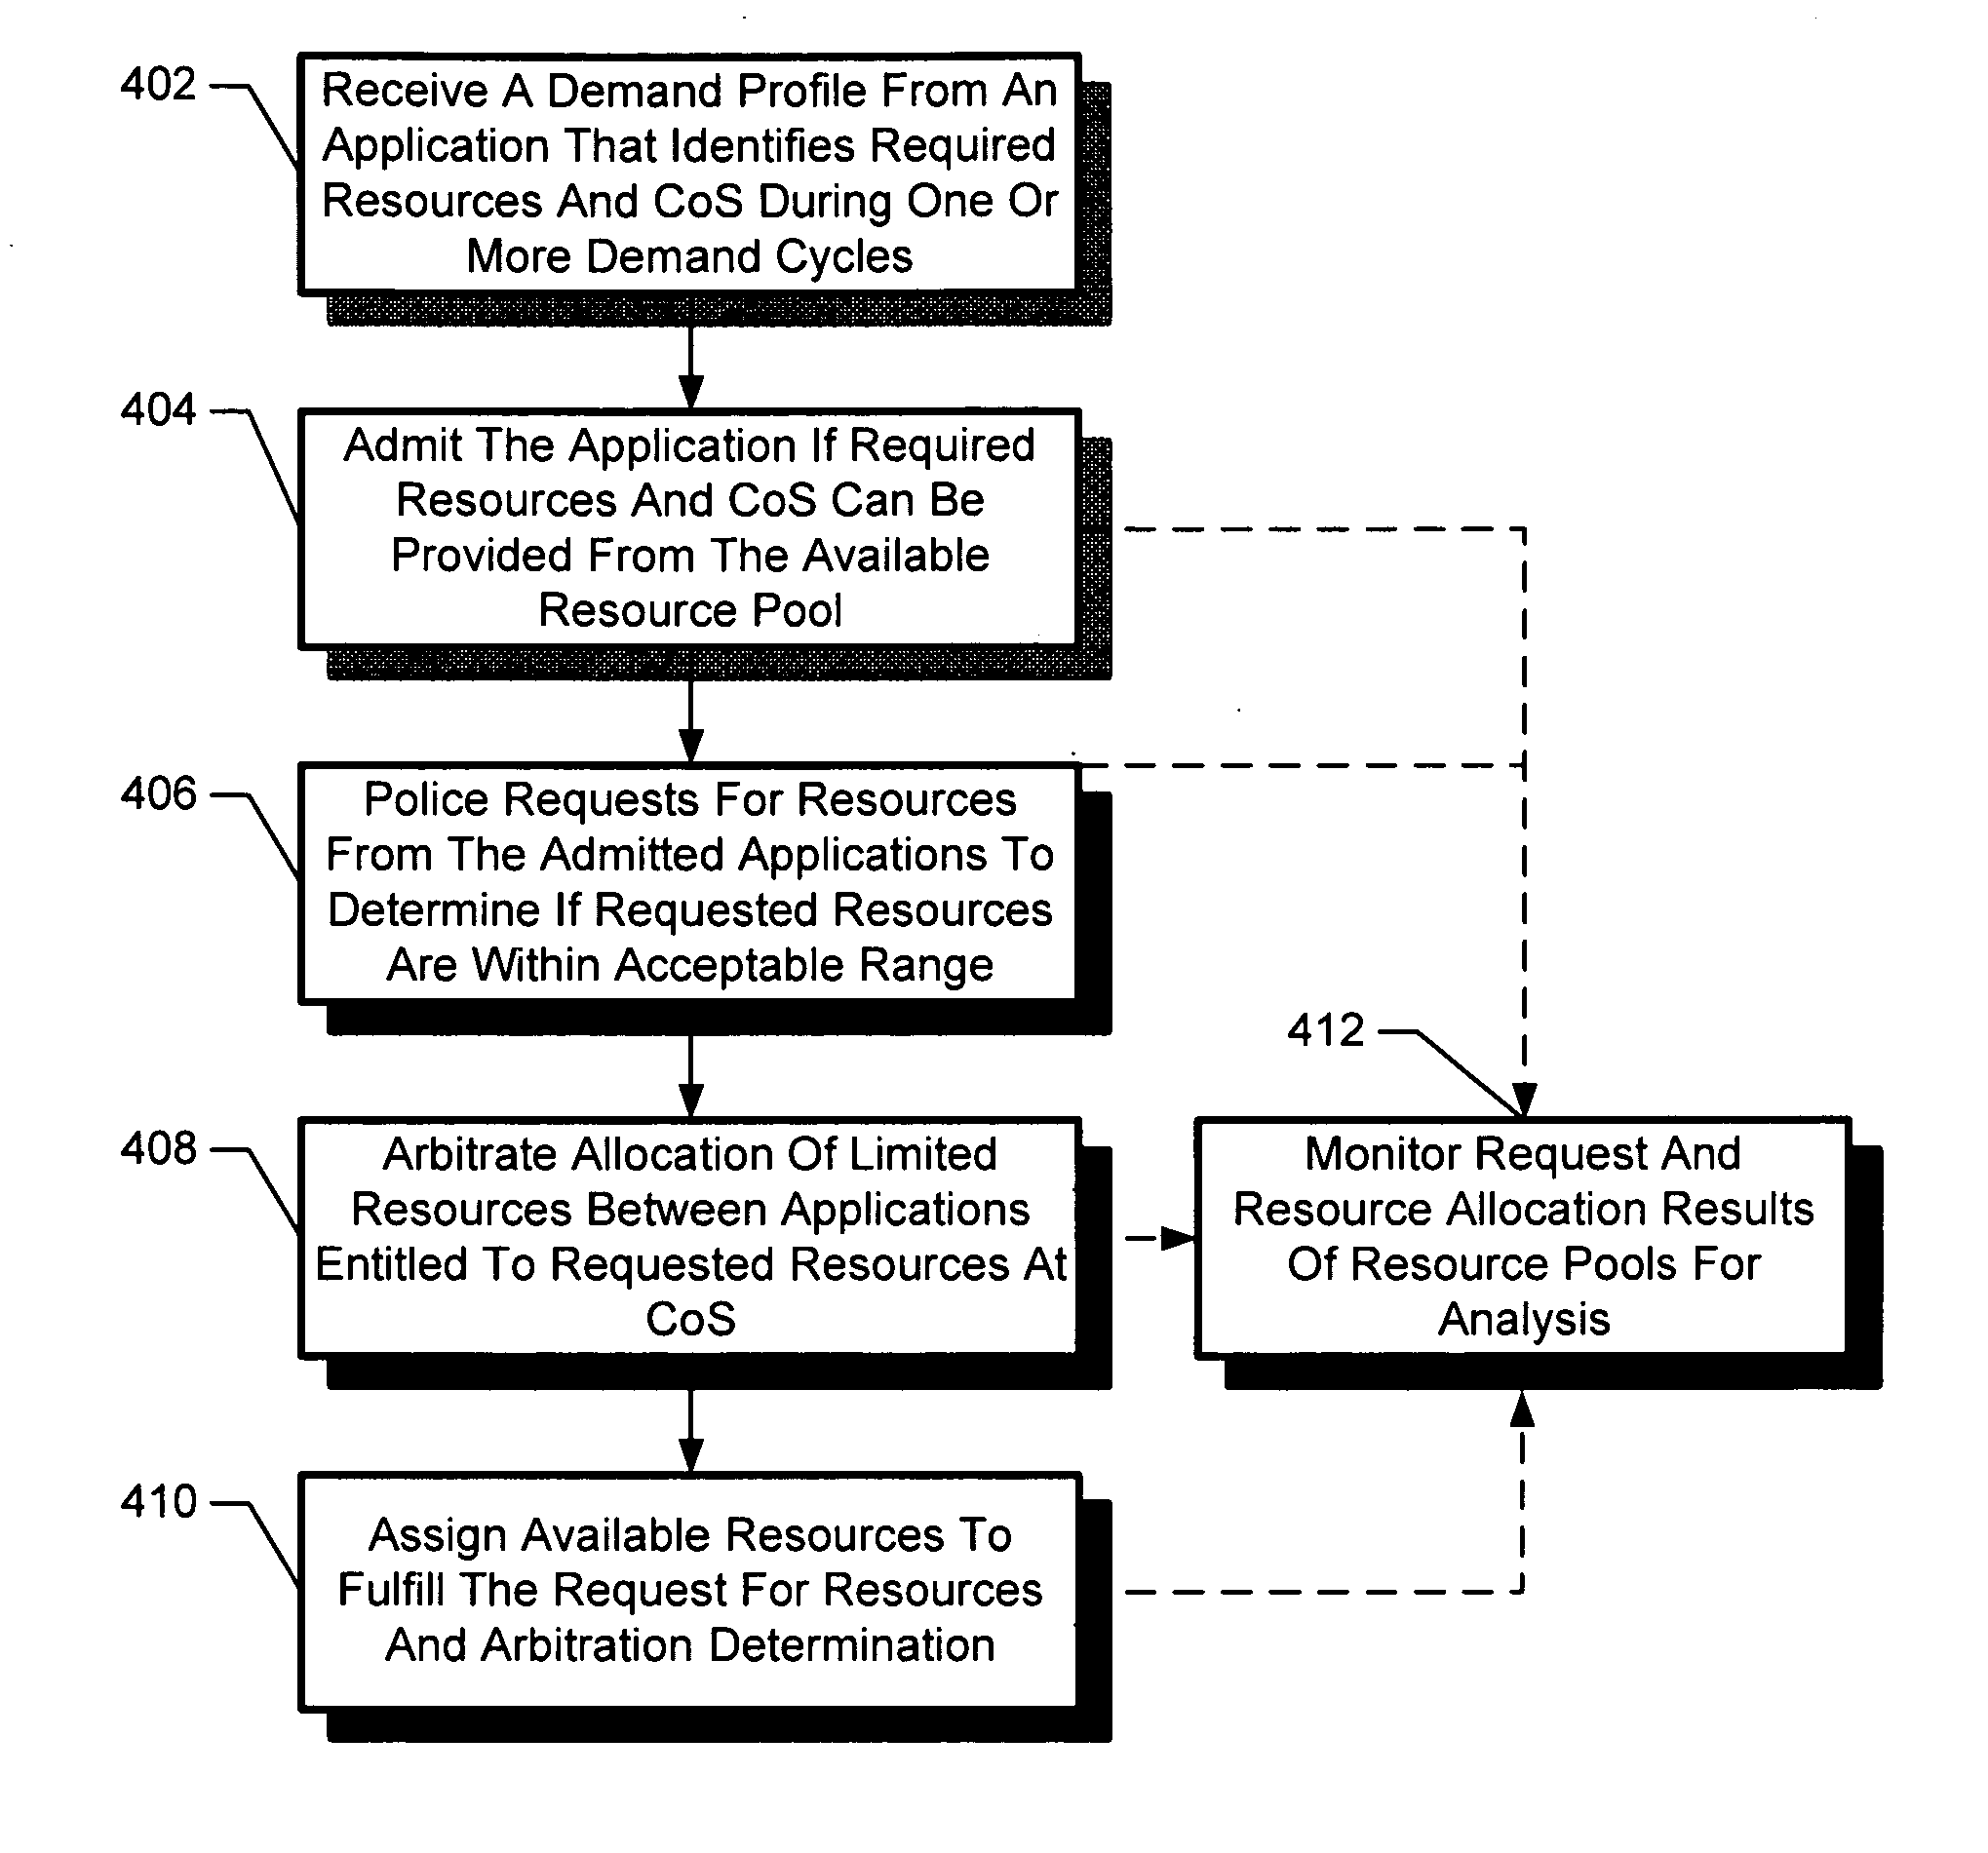 Trending method and apparatus for resource demand in a computing utility